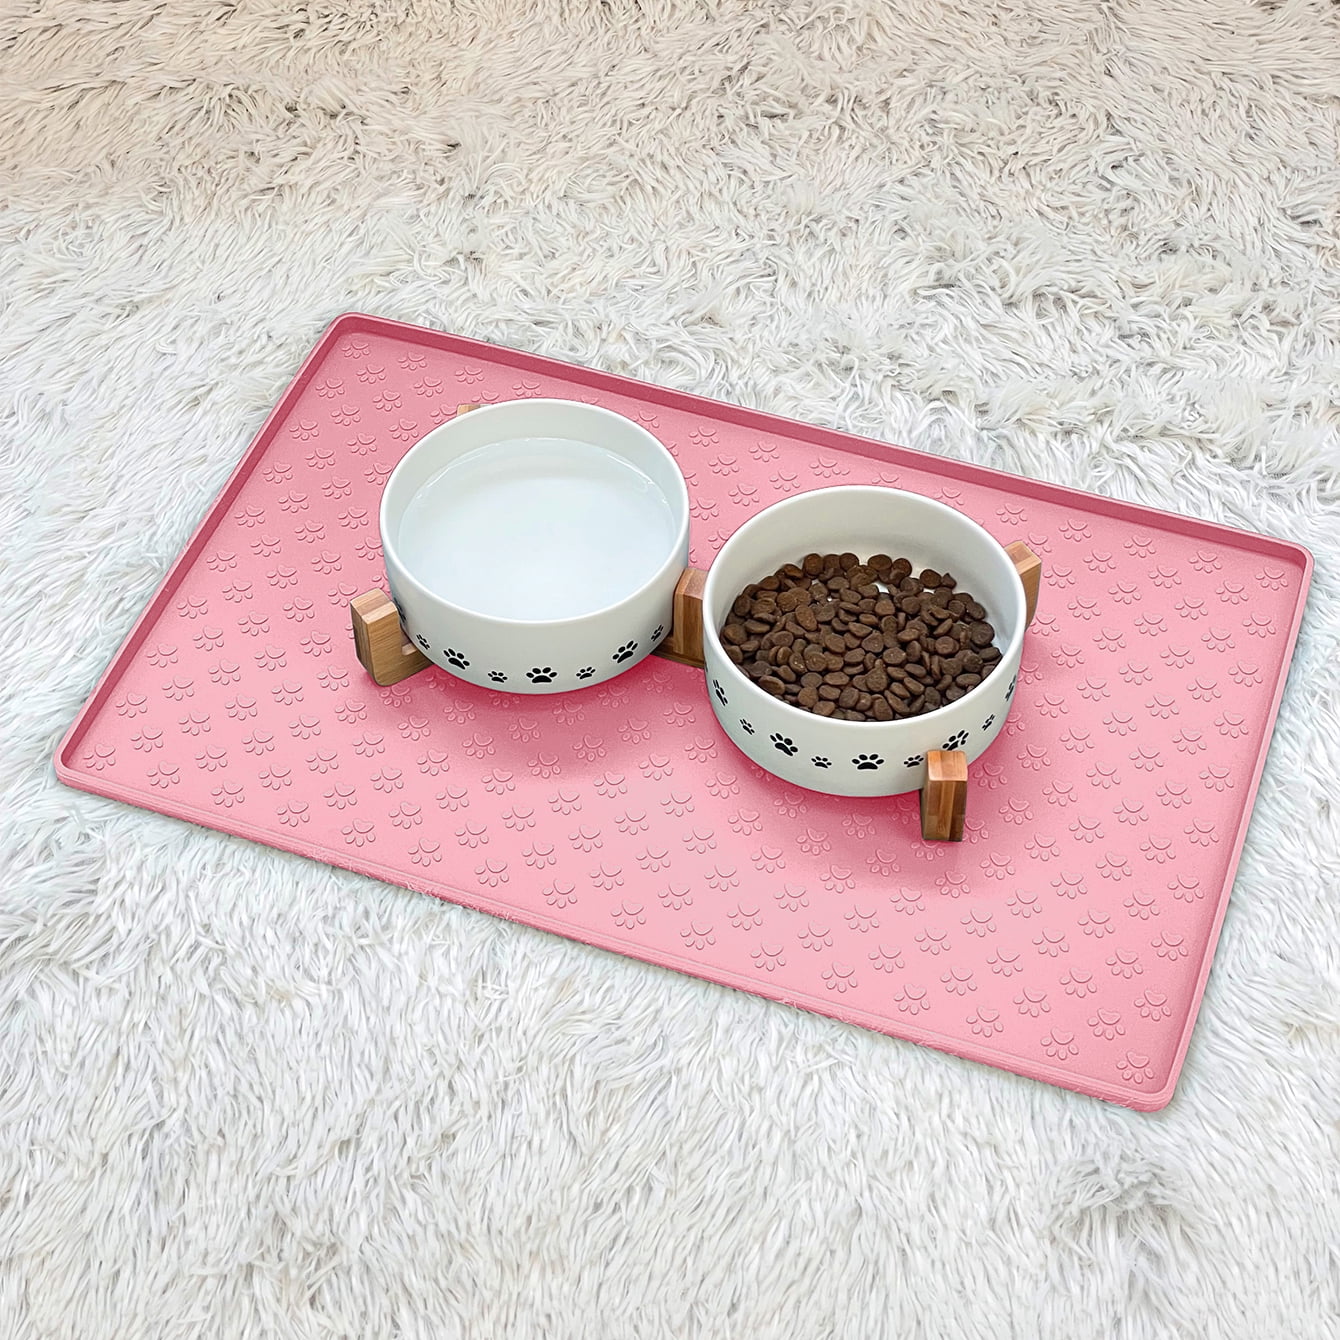  Stiio - Pet Feeding Mat, Rubber Backed Cat Food Mat for Floor  Non-Slip Waterproof Dog Water Bowl Tray, Easy to Clean Pet Placemat, Pink  17x28 inches : Pet Supplies